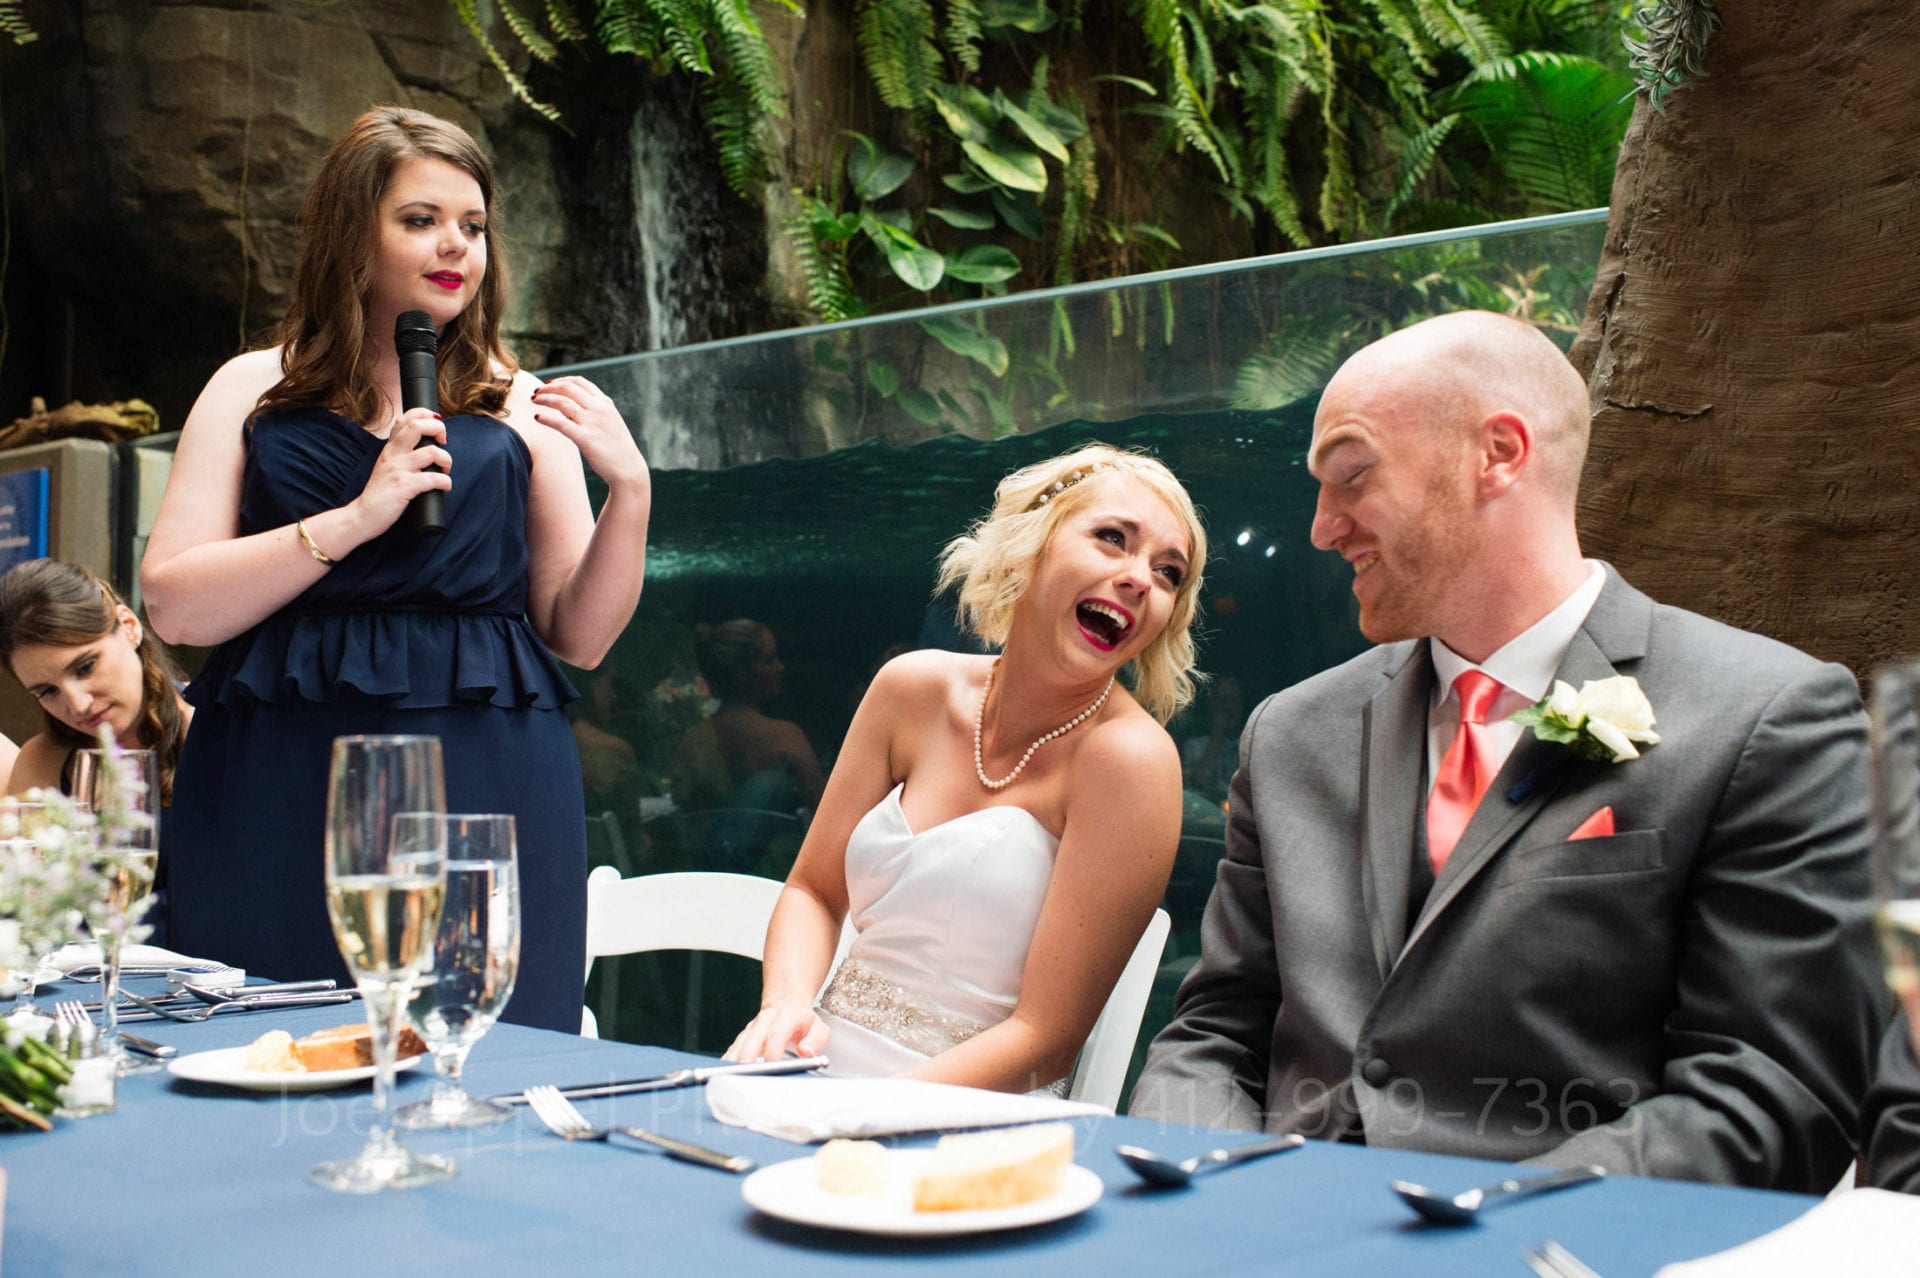 A bride looks at her groom and laughs as her maid of honor gives a speech at their PPG Aquarium Wedding. The groom wears a gray suit with a pink tie. The maid of honor wears a navy blue dress. The bride wears a strapless white gown. There are plates of bread on the blue tablecloth in front of them.